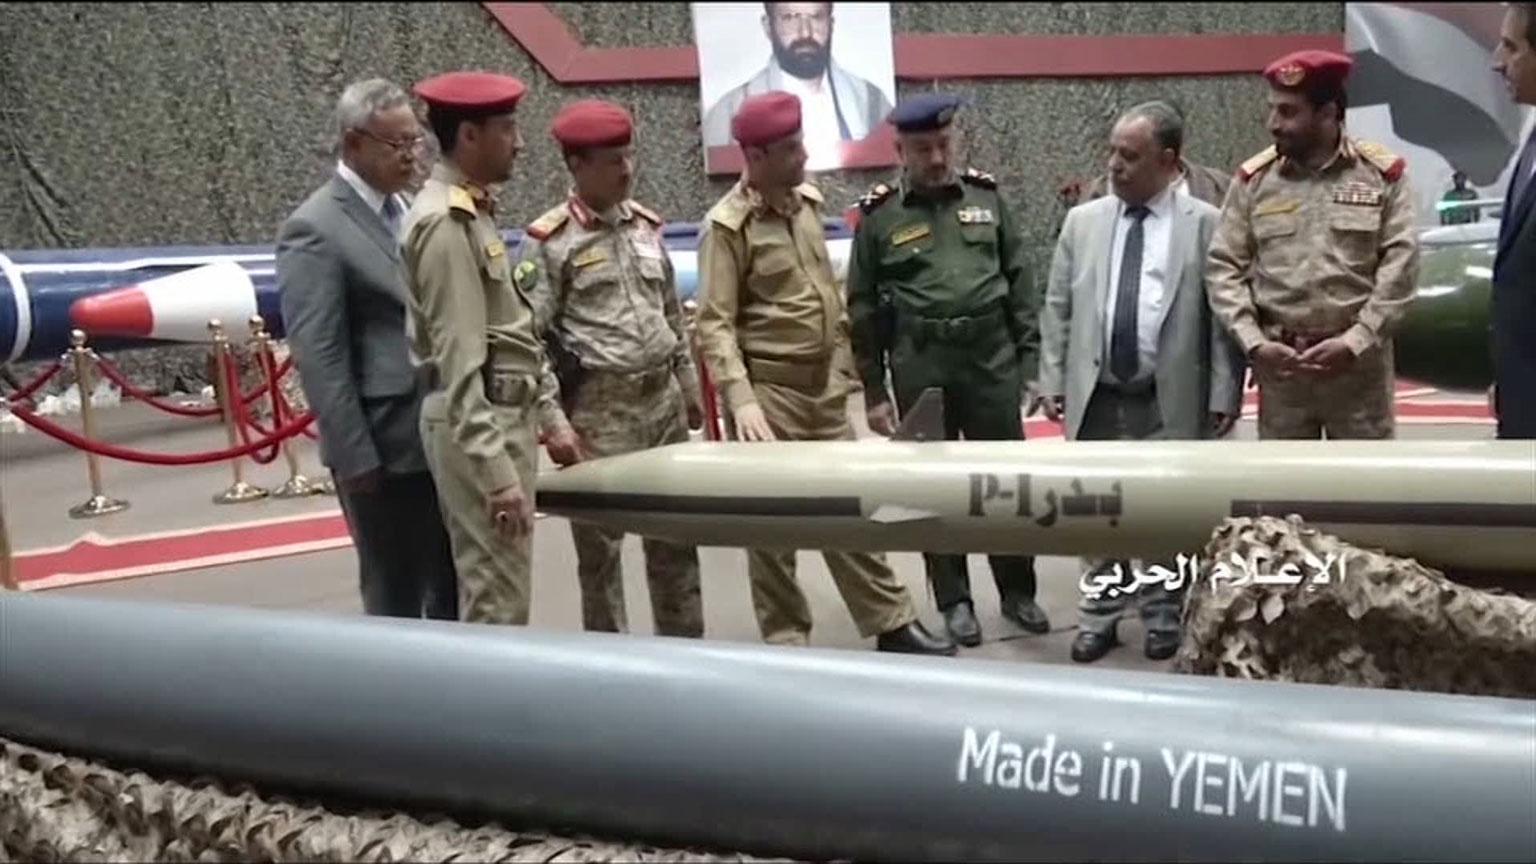 Exhibition of various missiles and unmanned aerial vehicles at an undisclosed location in Yemen